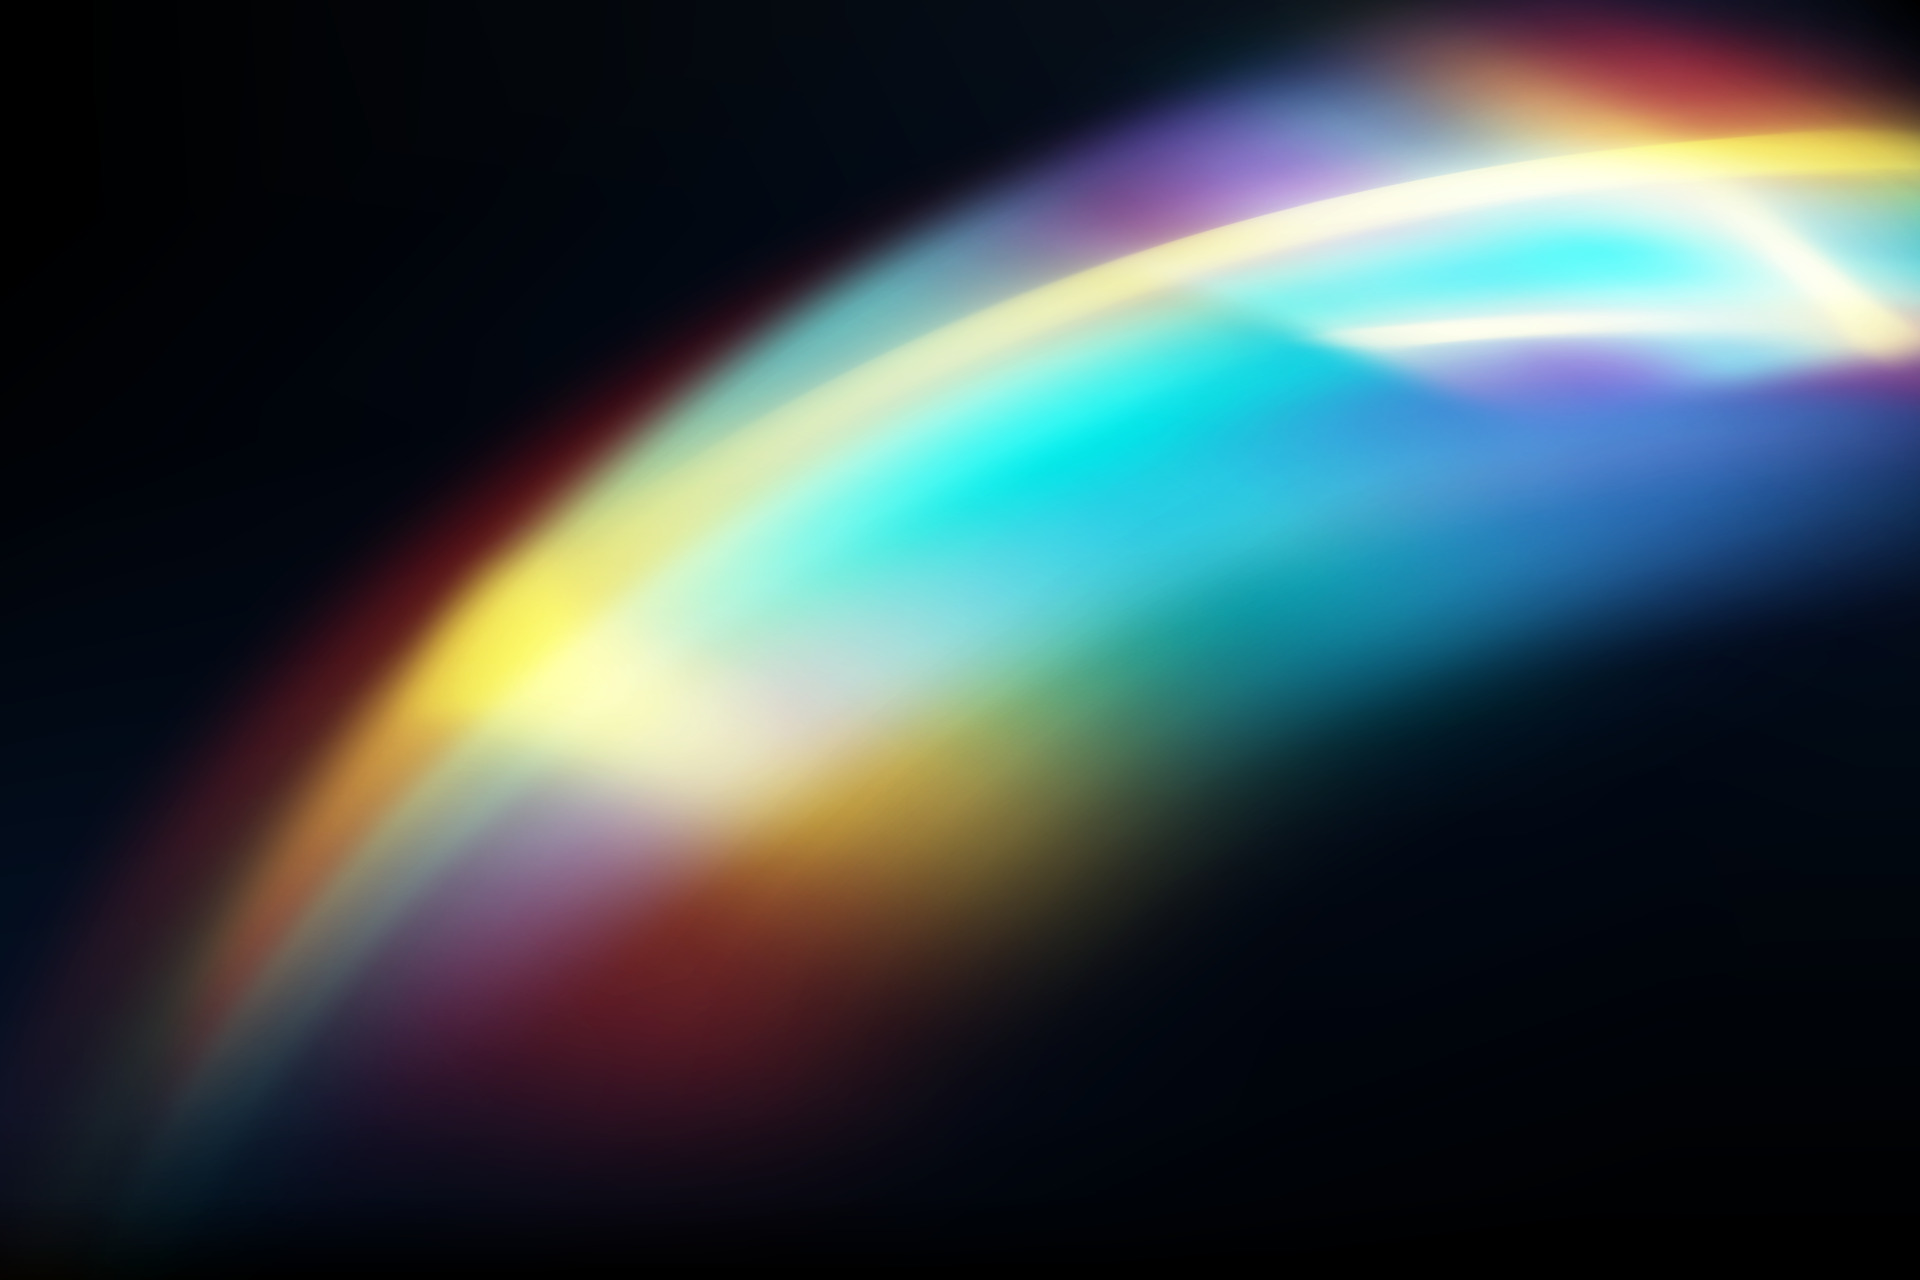 Rainbow highlights on a black background.Glare or reflection from